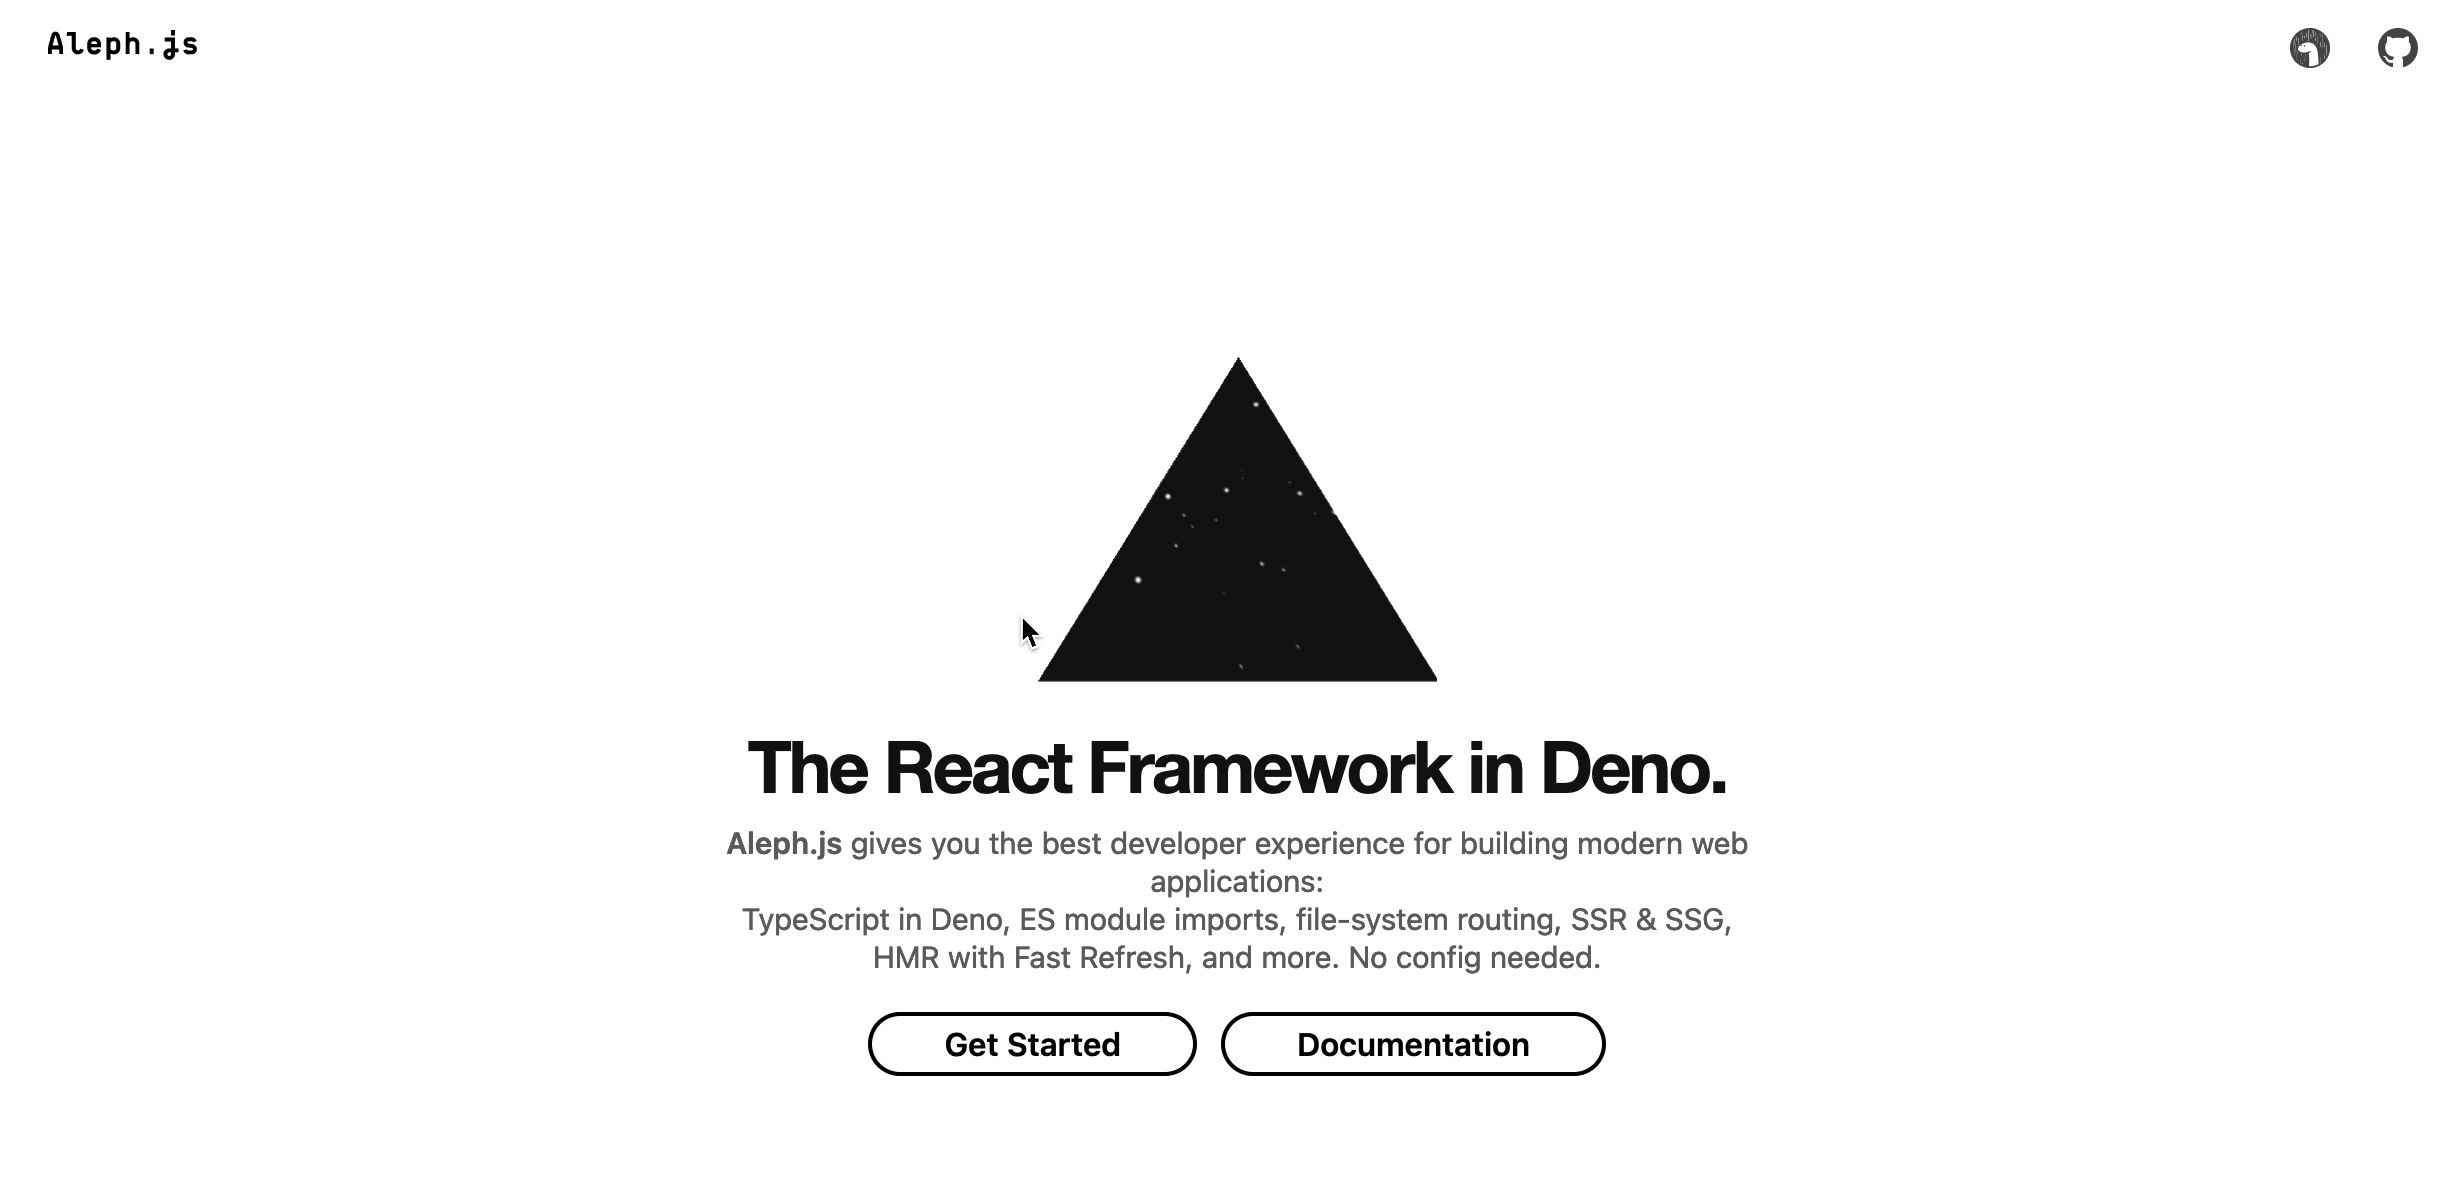 How to Build React Applications with Deno Using the AlephJS Library